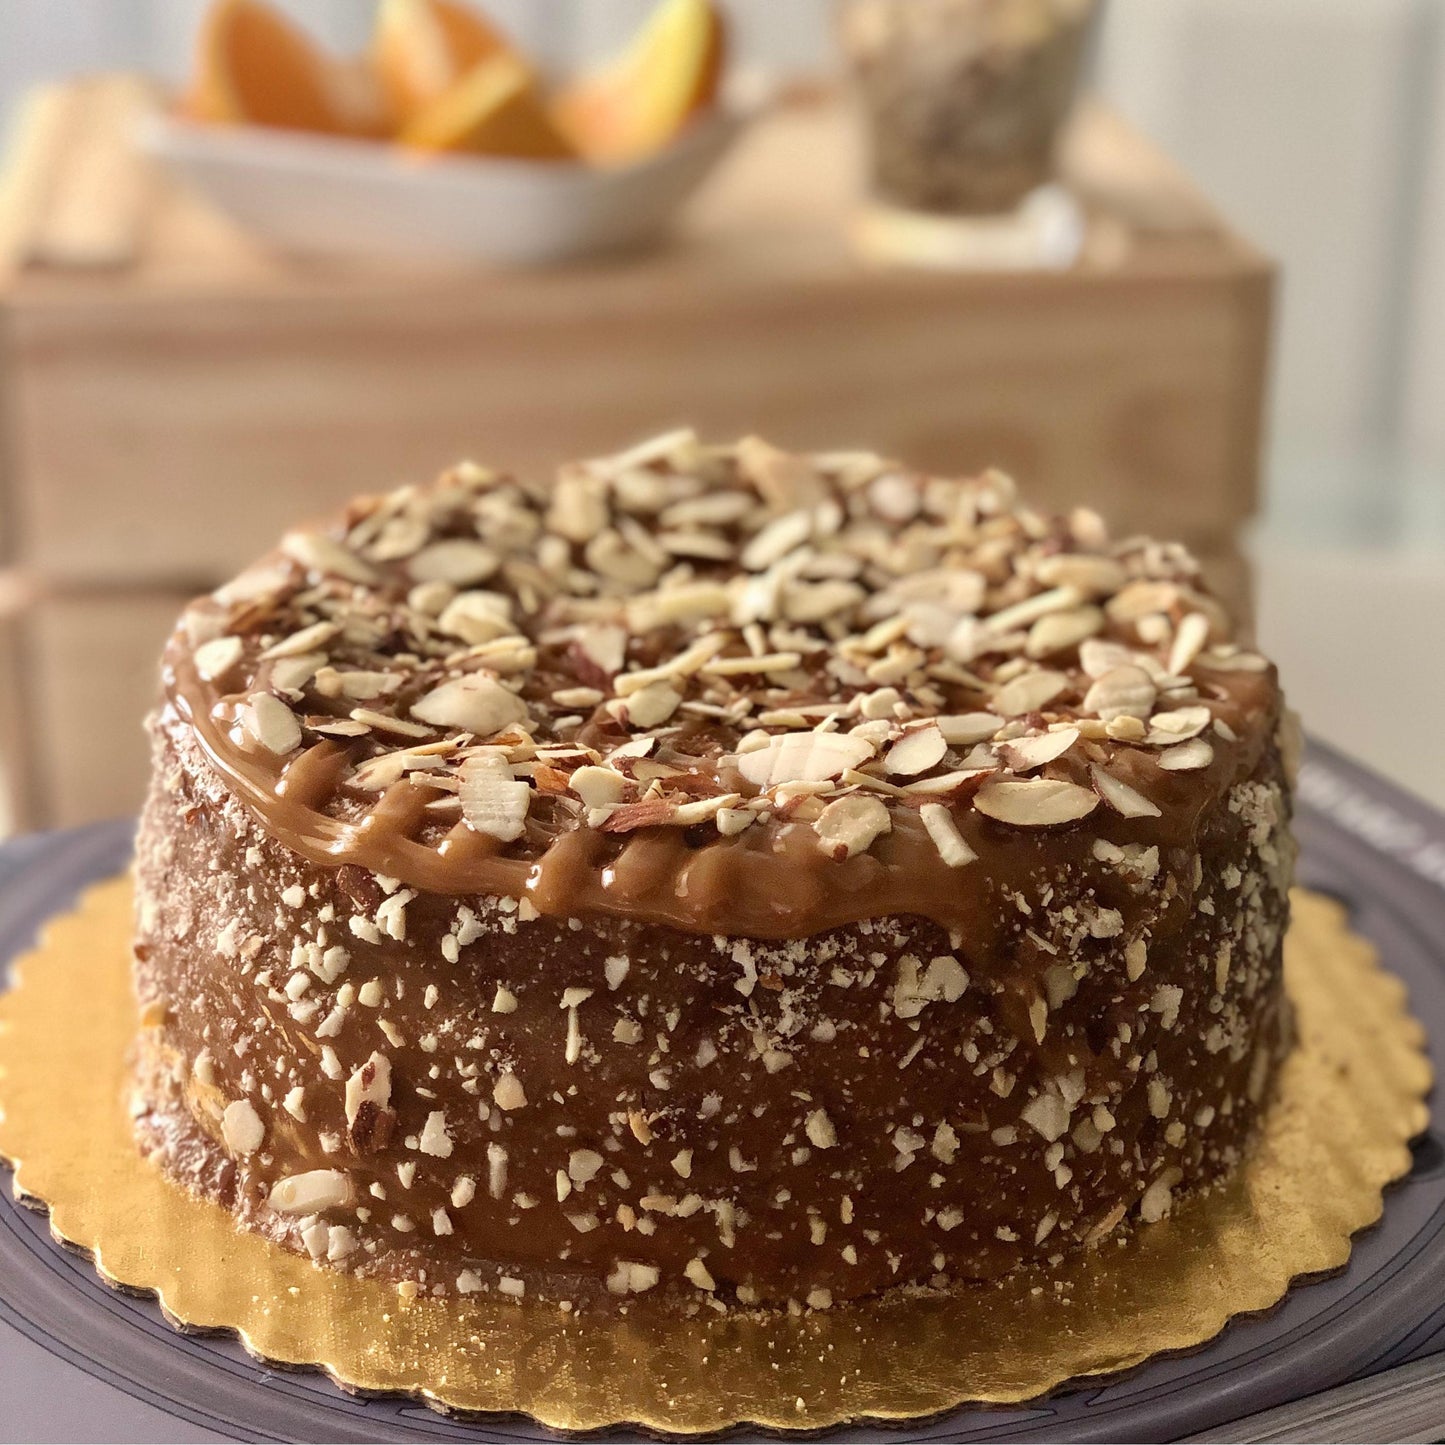 Gluten-Free, Dairy-Free and Sugar-Free Pumpkin Cinnamon cake with caramel topping, perfect for health-conscious dessert lovers. Full Life Gourmet Bakery